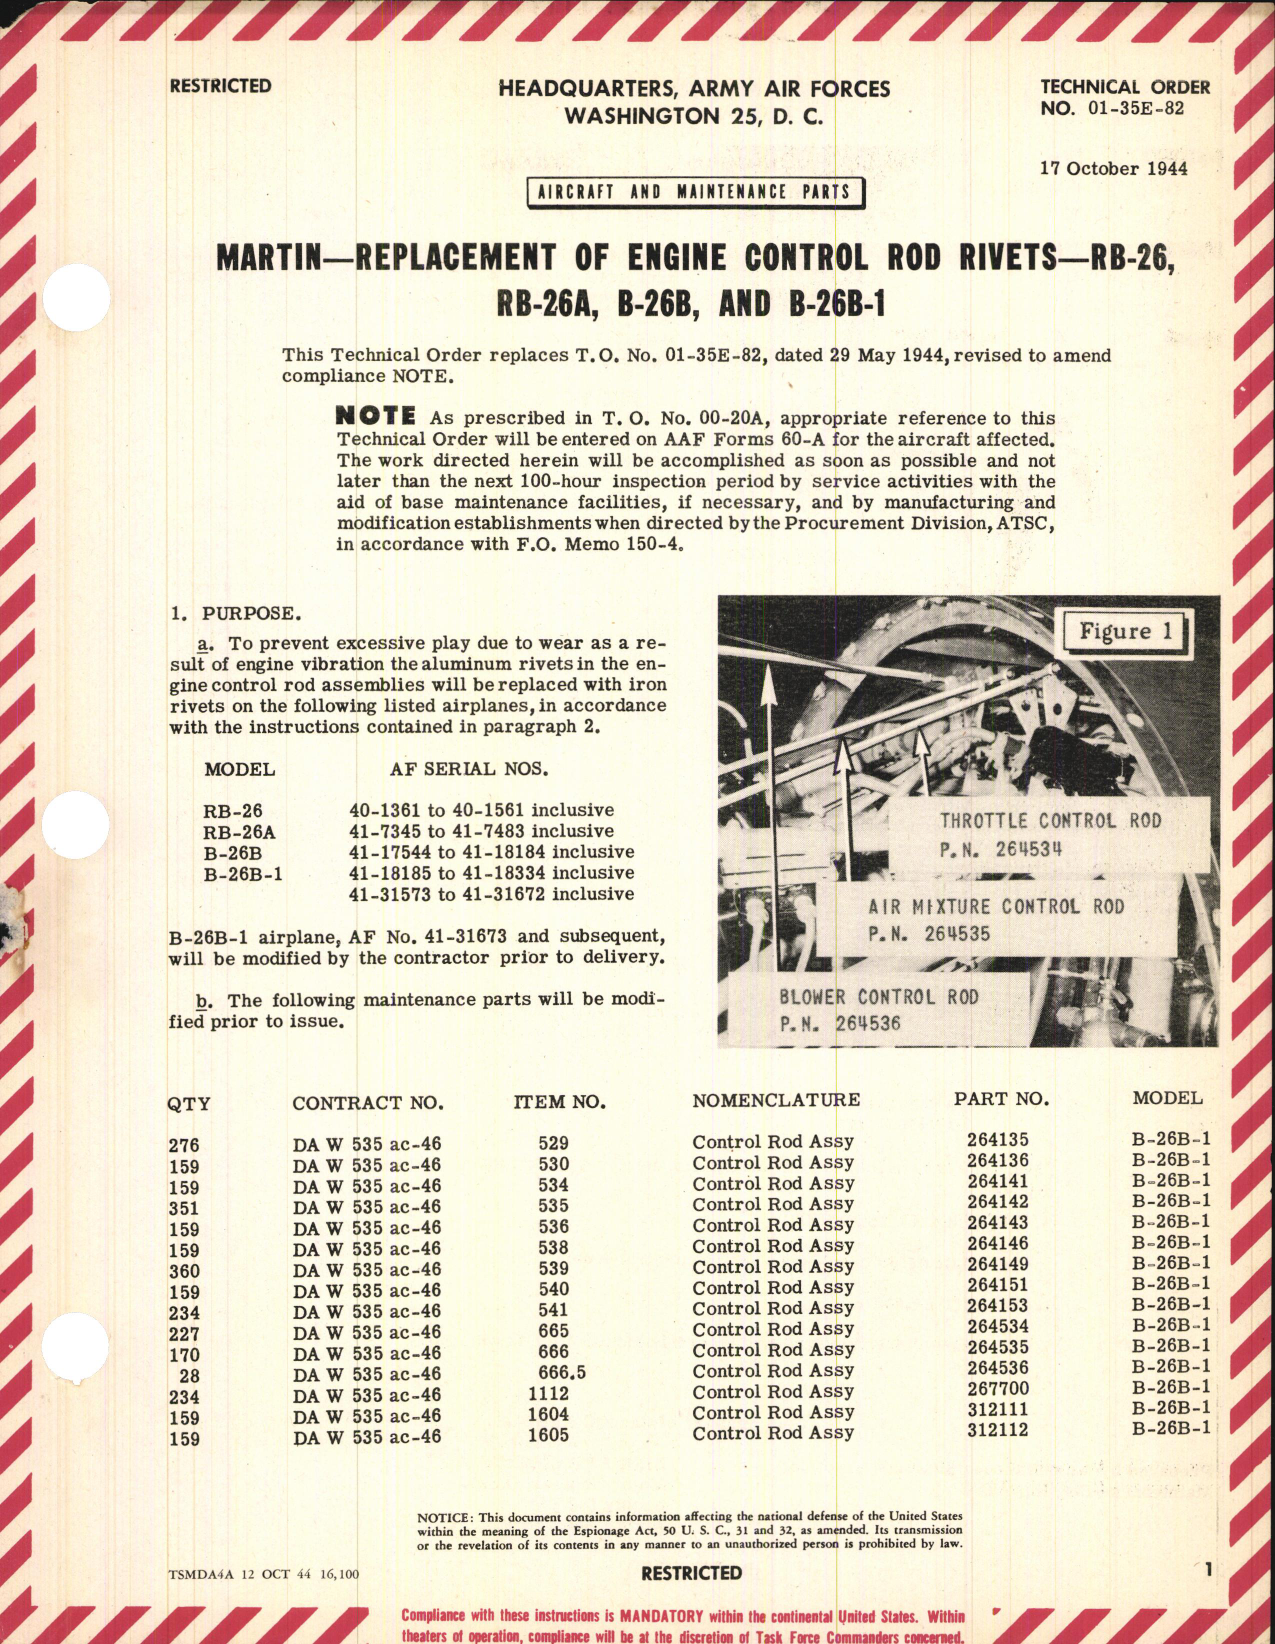 Sample page 1 from AirCorps Library document: Replacement of Engine Control Rod Rivets for RB-26, RB-26A, B-26B, and B-26B-1